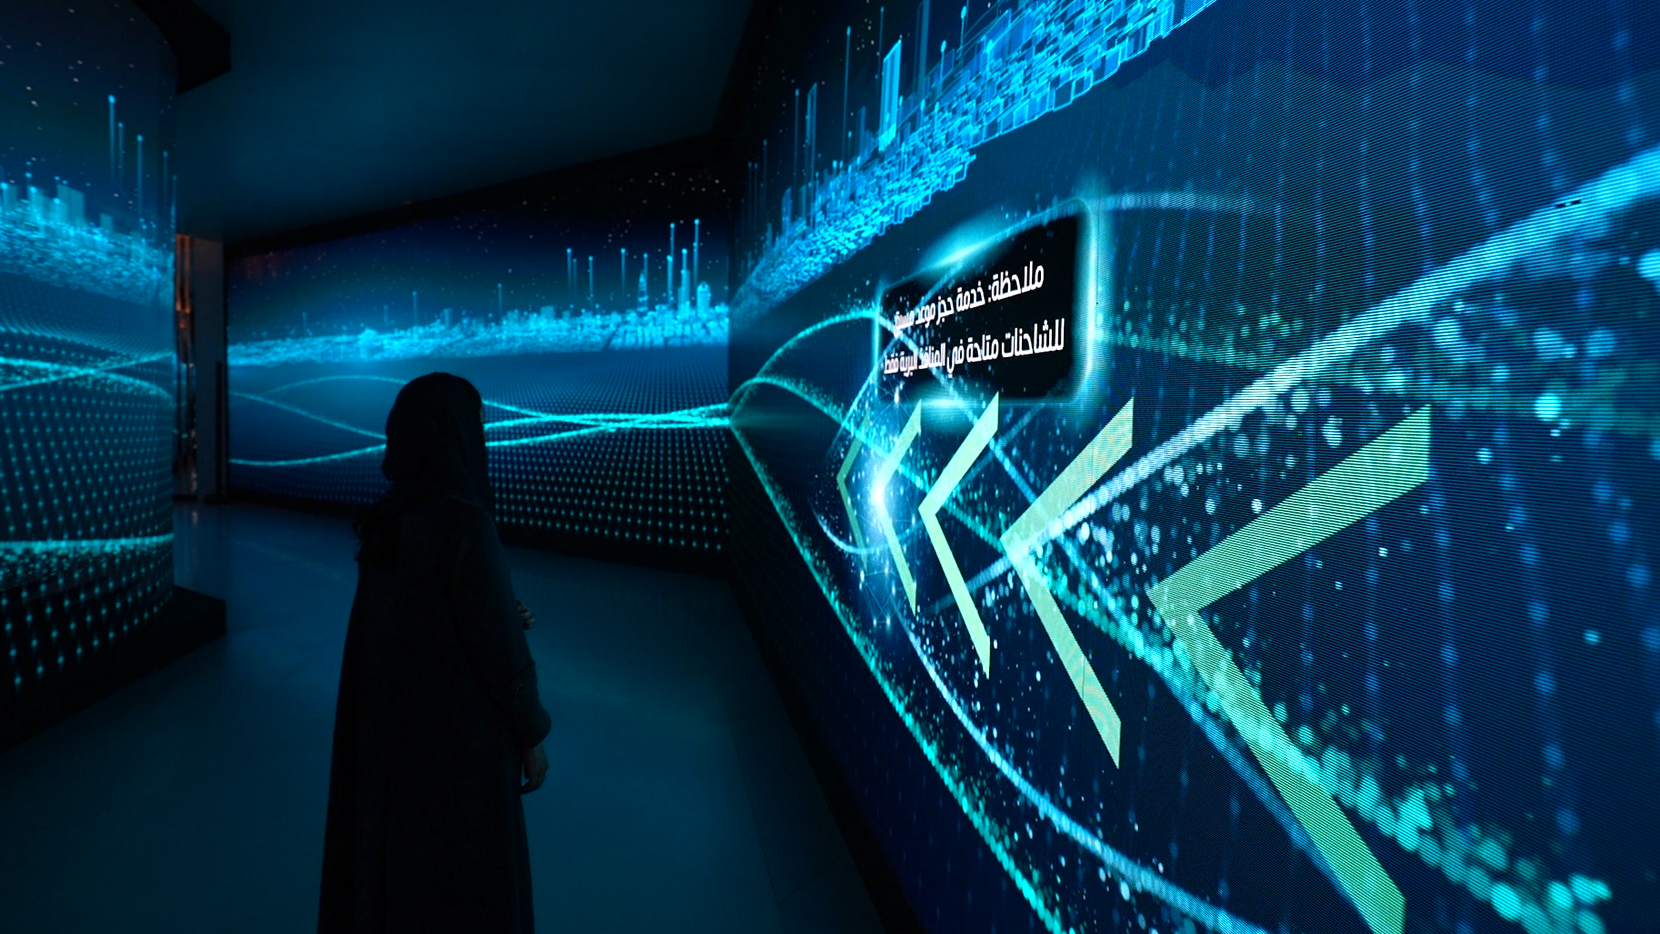 View of a woman standing in the immersive passage way of the booth design in Saudi by Battle Royal Studios